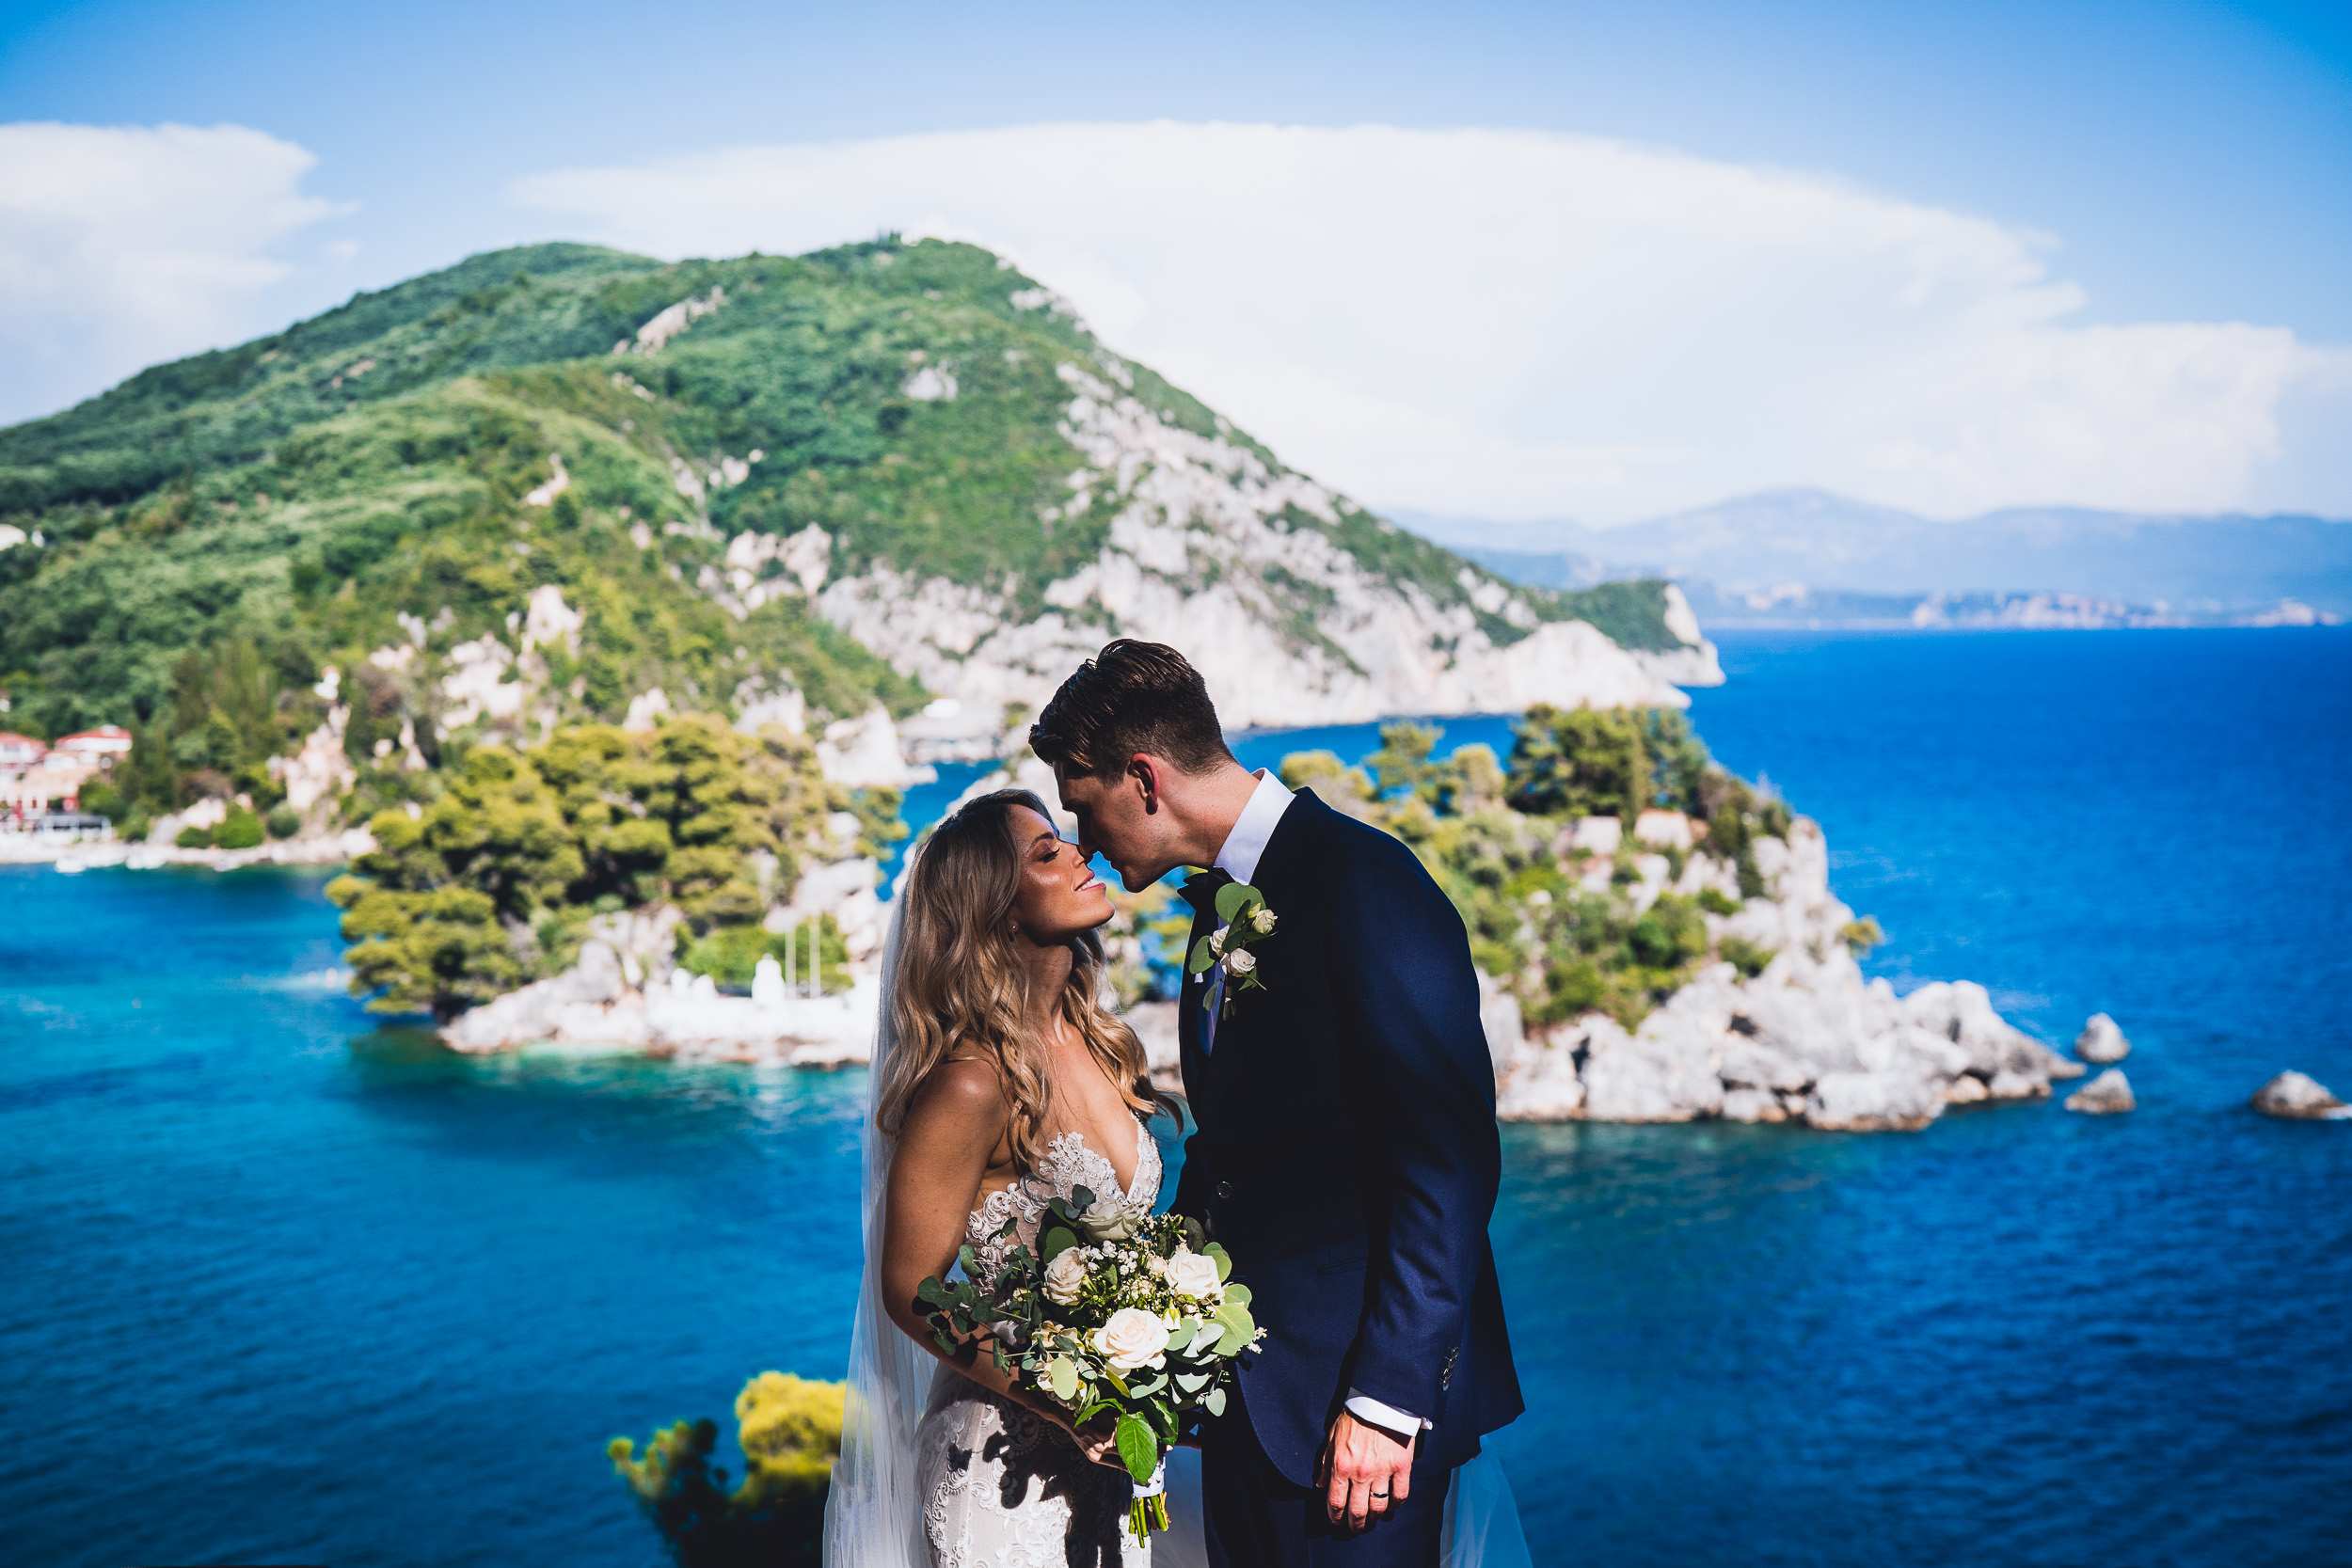 A wedding photo capturing a groom and bride sharing a kiss on a cliff overlooking the sea.